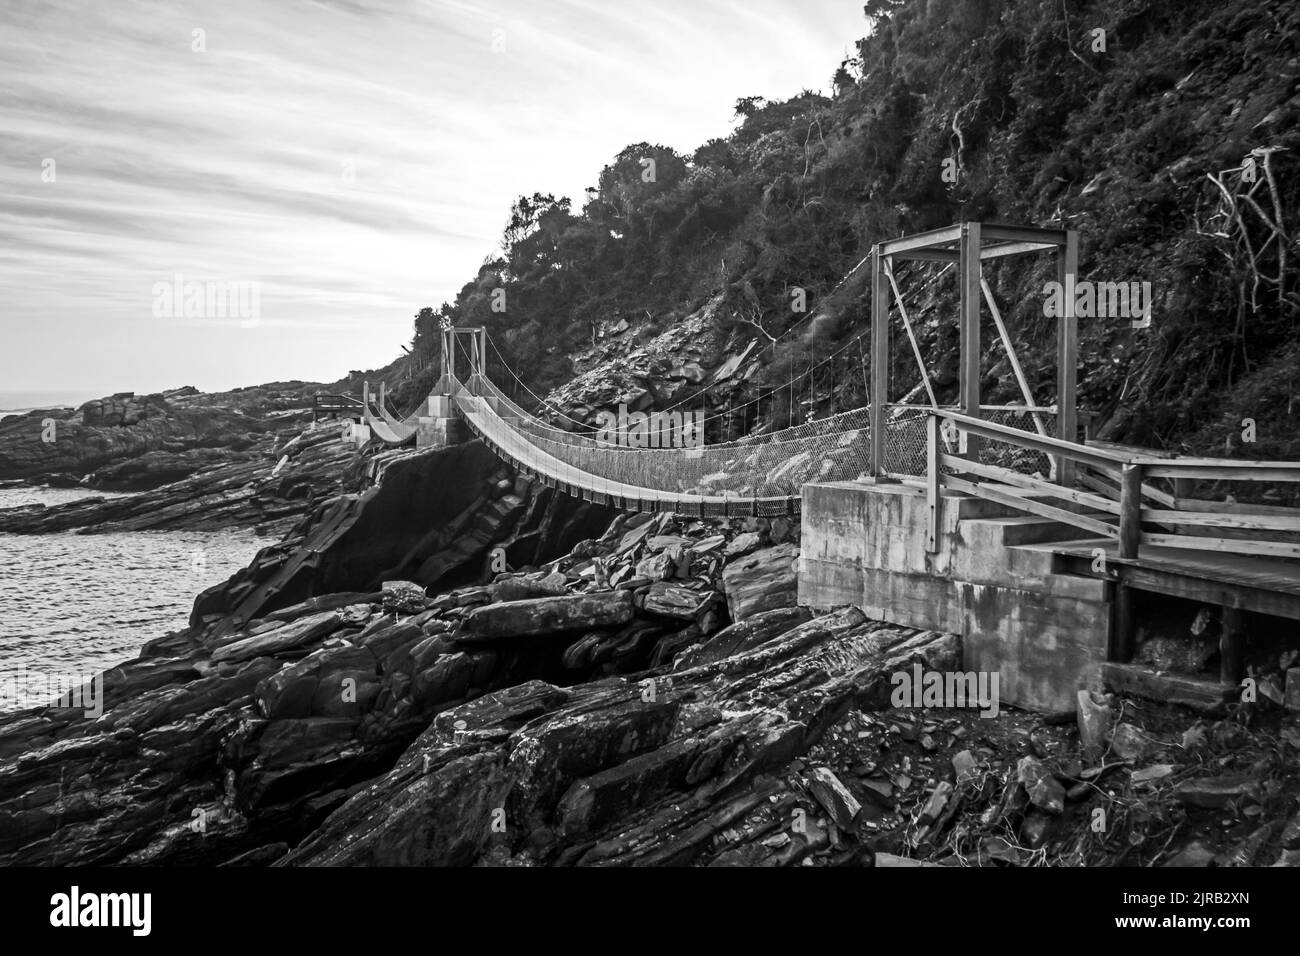 A walkway off suspension bridges, following the tall jagged cliffs along the Tsitsikamma coastline of South Africa, in black and white. Stock Photo